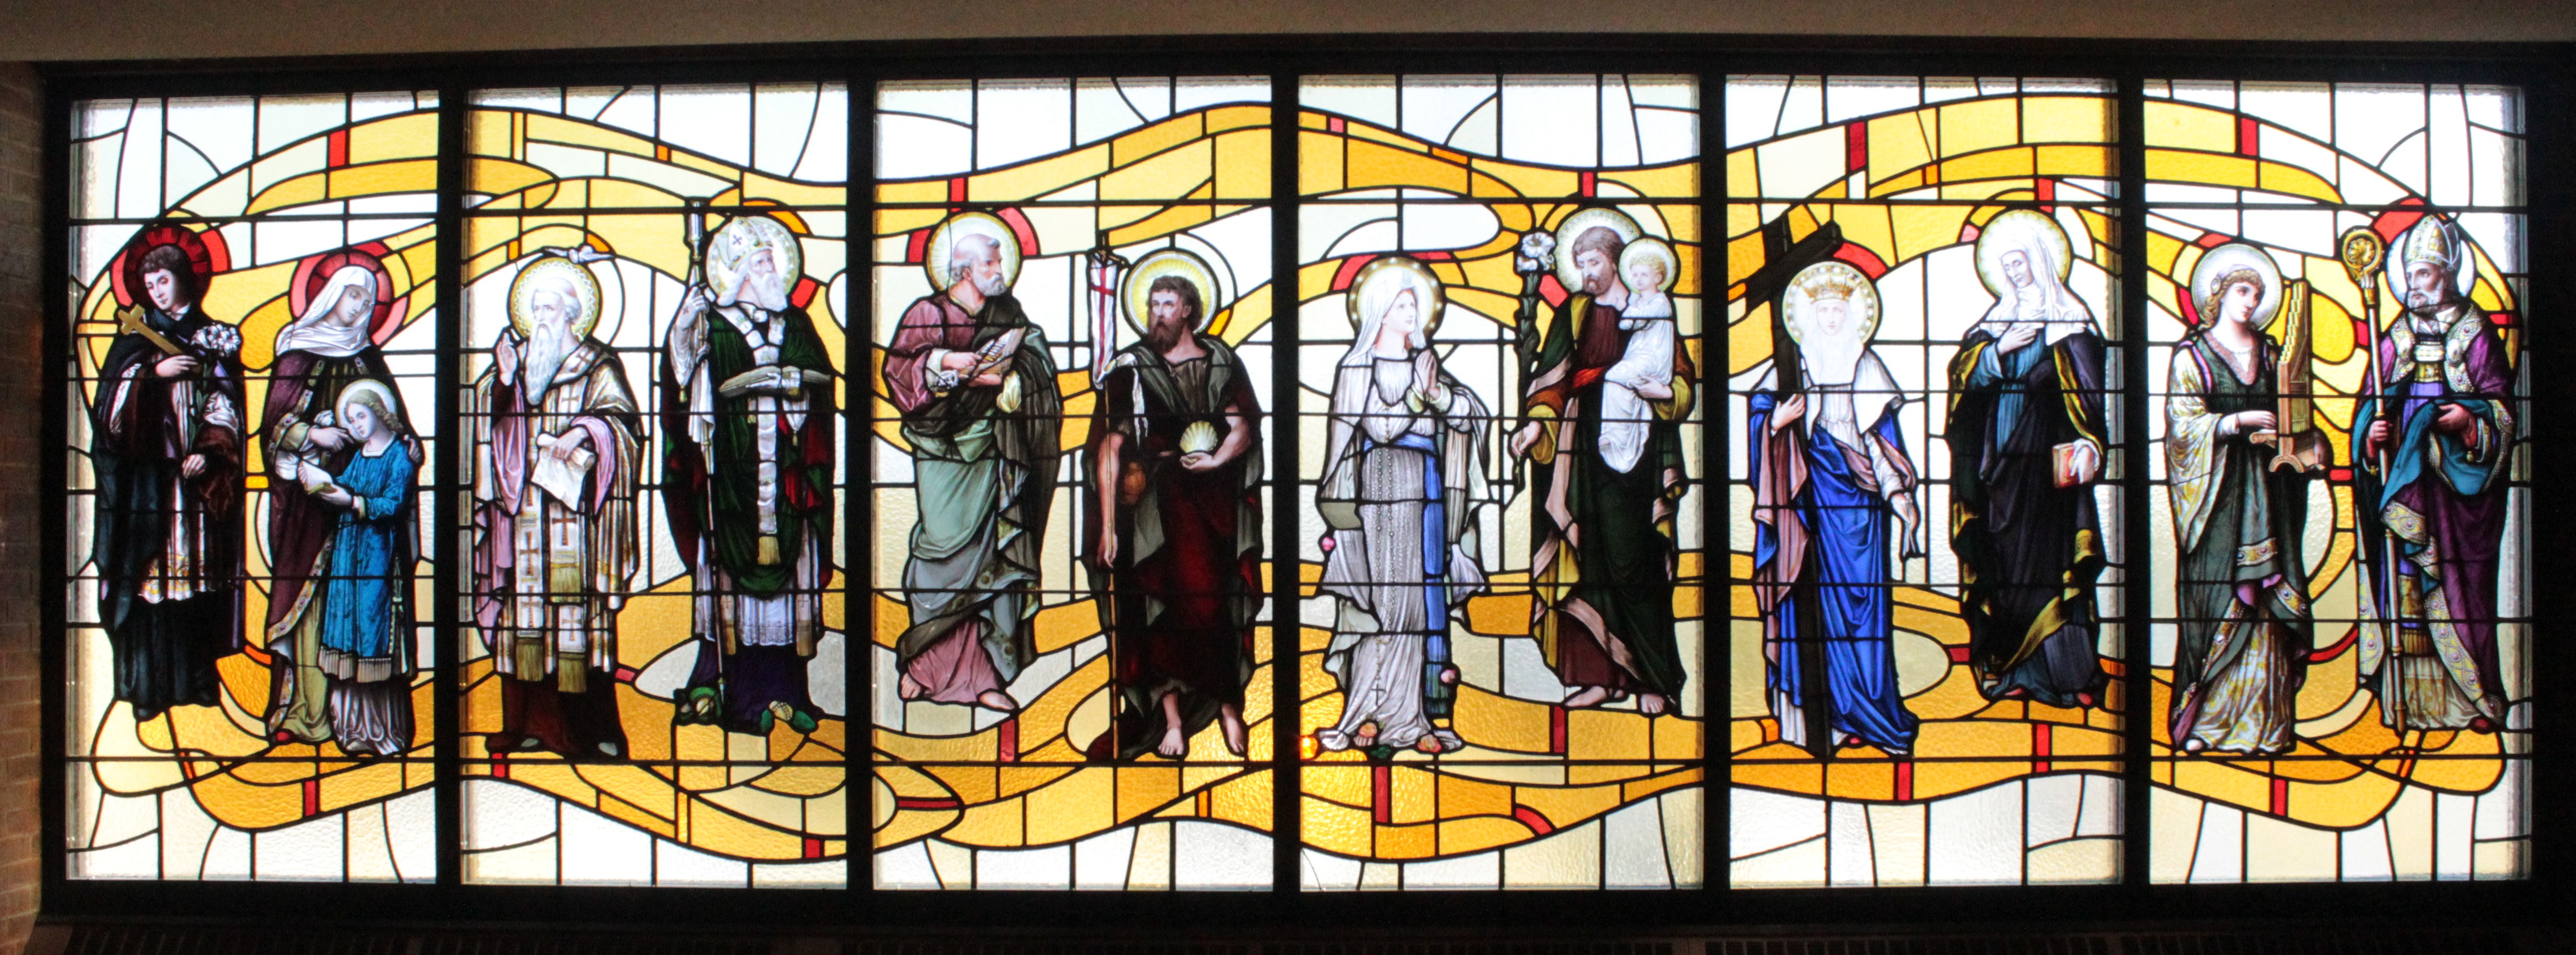 A picture from the stained glass room from St. John's. It depicts many saints.